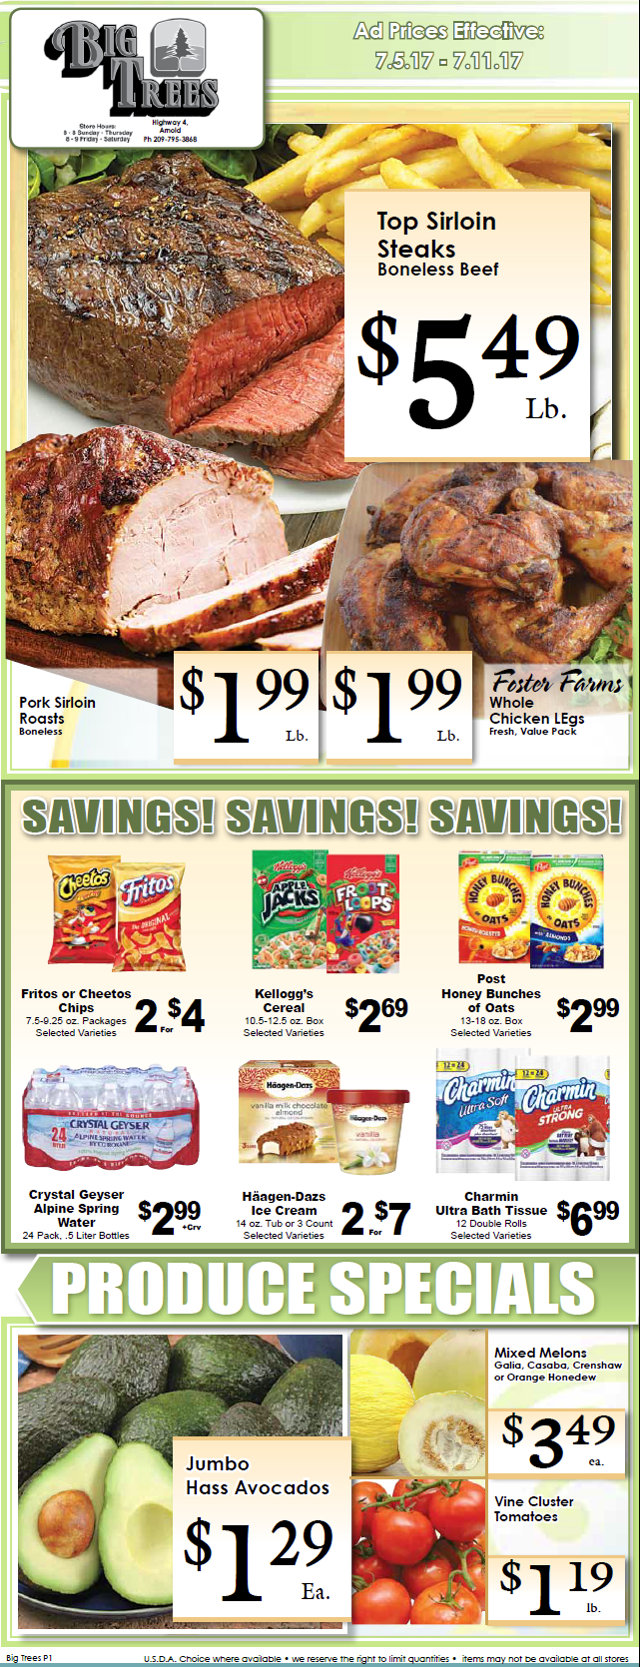 Big Trees Market Weekly Ad & Specials Through July 11th